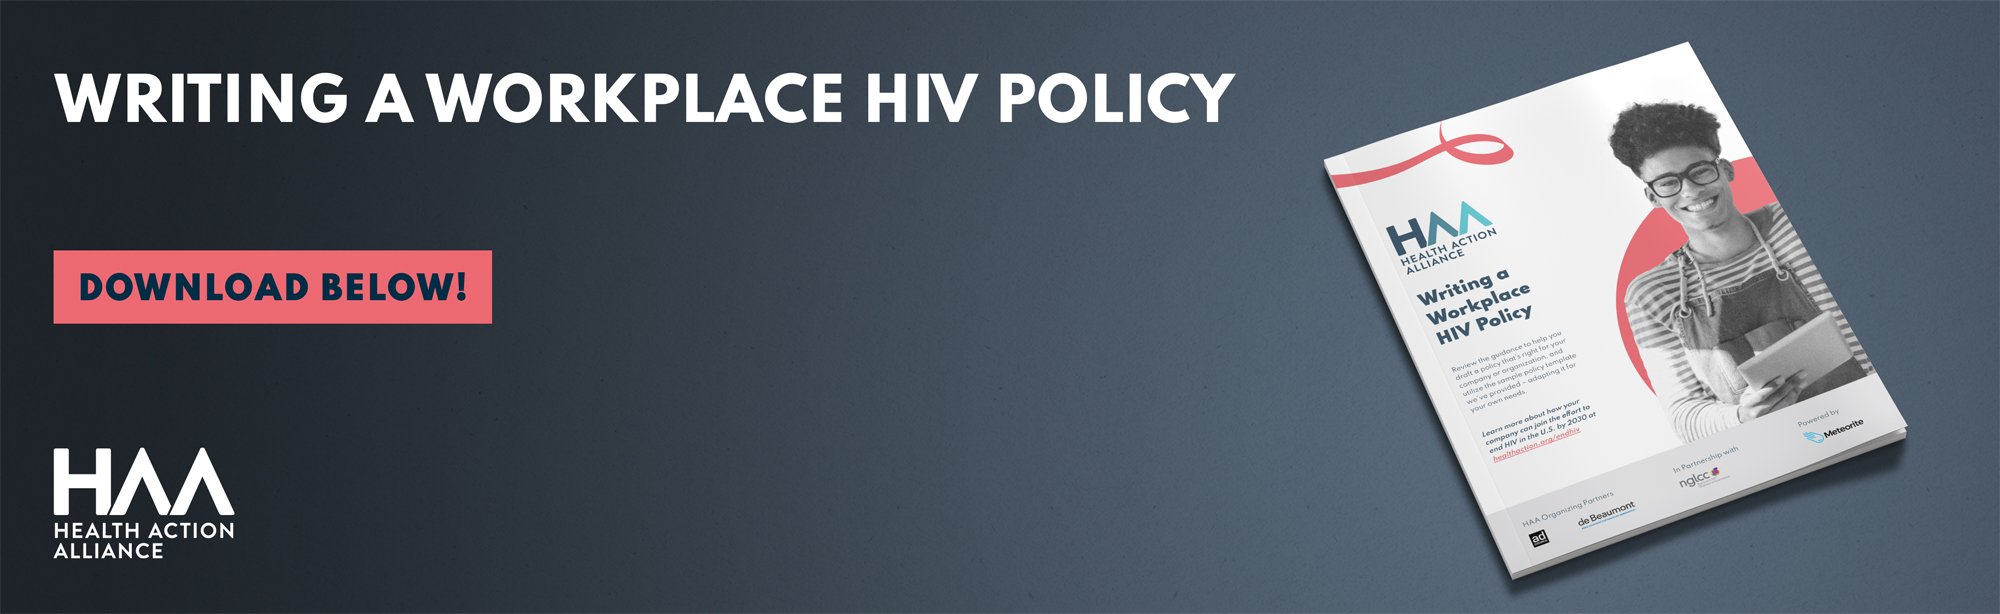 Writing-a-Workplace-HIV-Policy